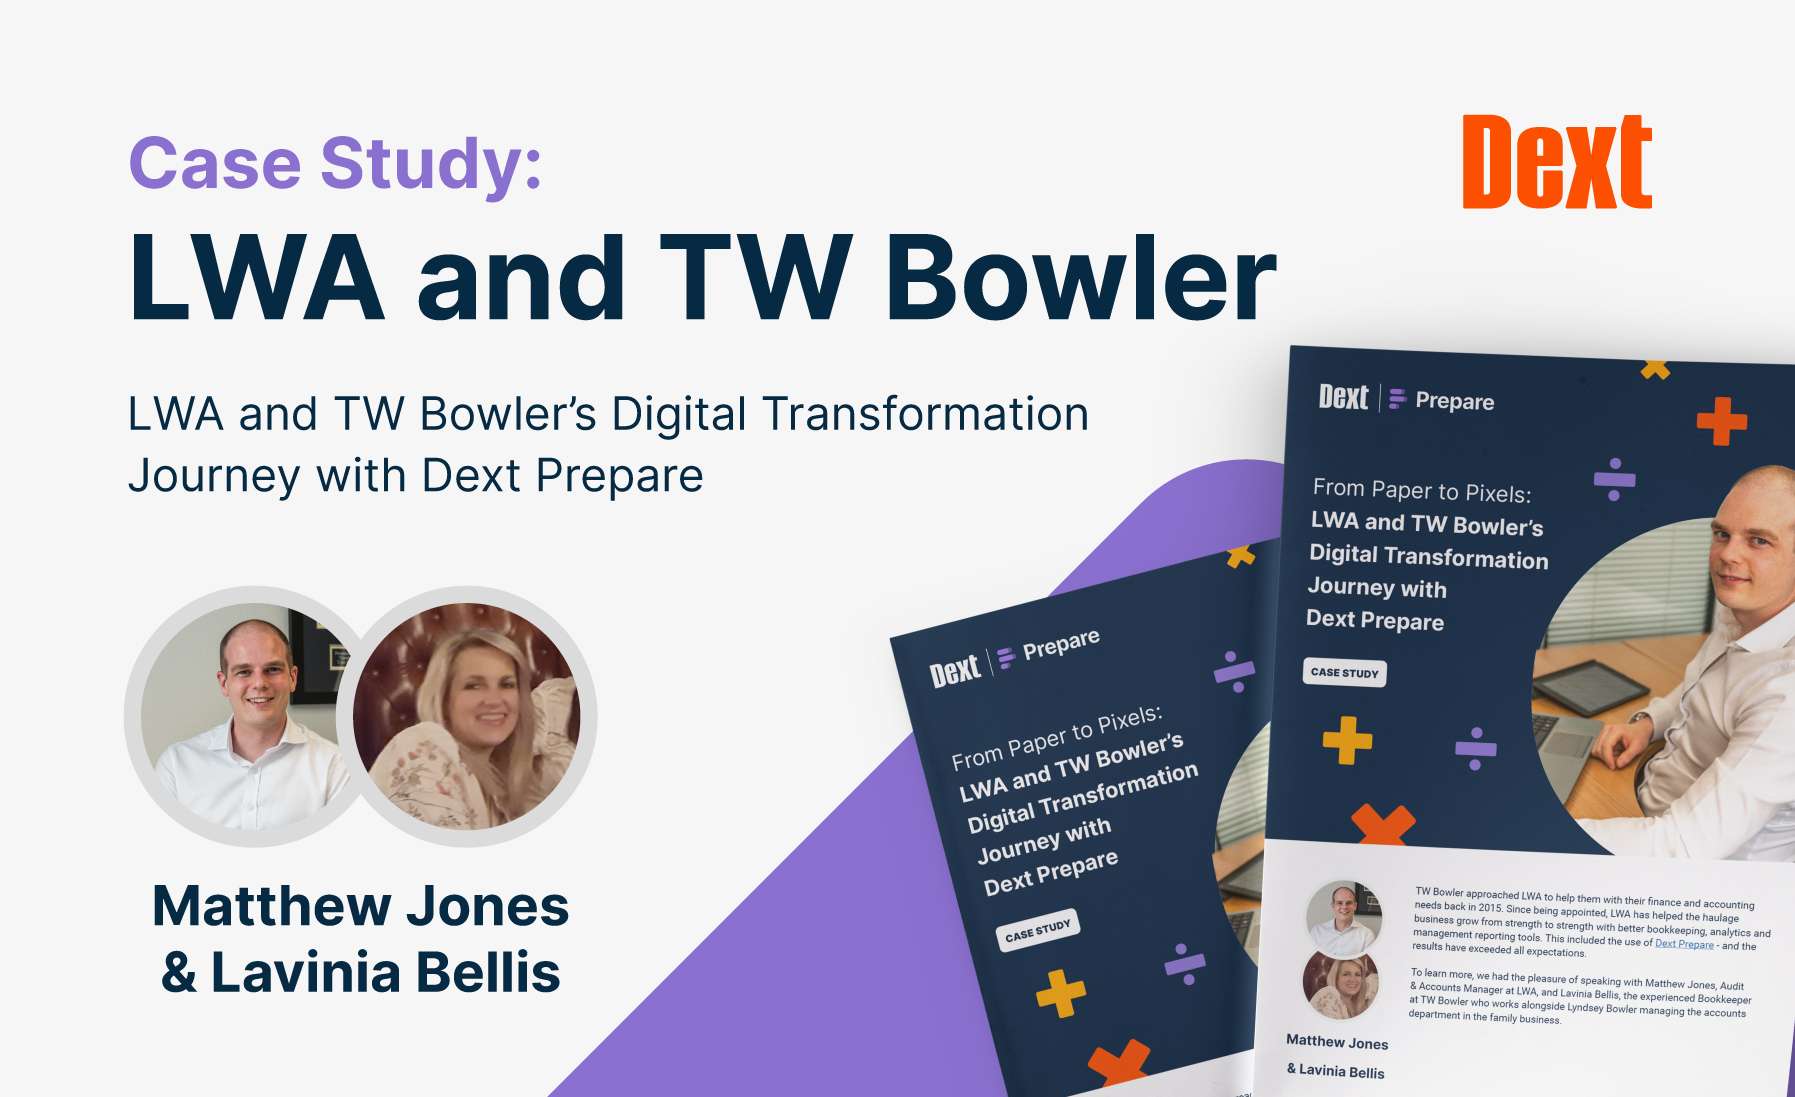 From Paper to Pixels: LWA and TW Bowler’s Digital Transformation Journey with Dext Prepare